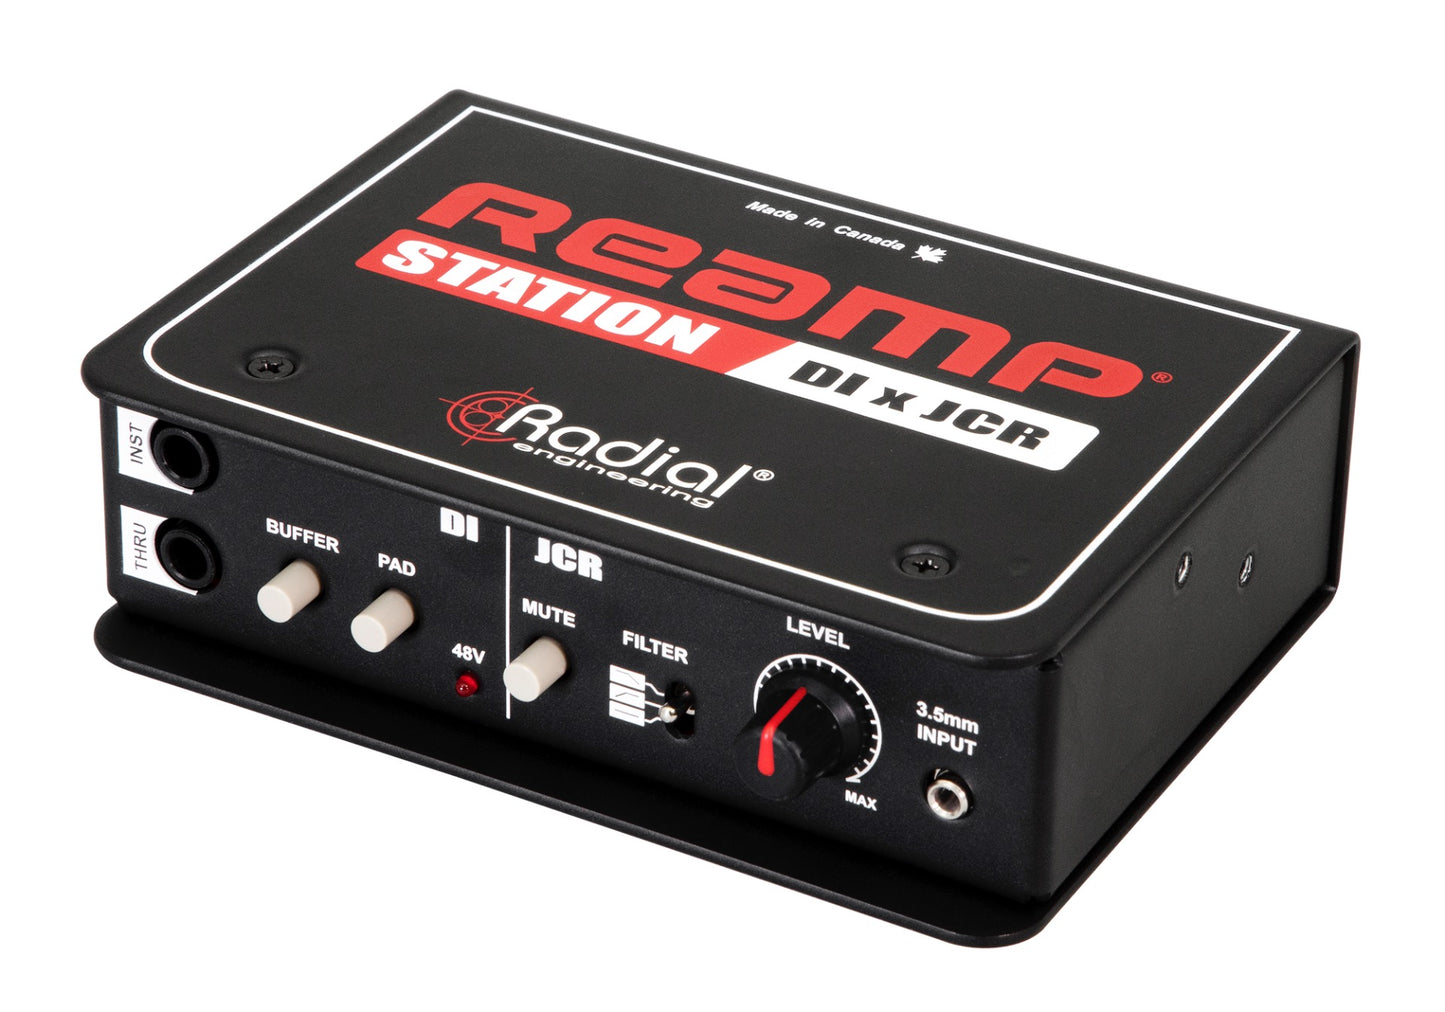 Radial Engineering Reamp Station Combination Active Direct Box and Reamp JCR